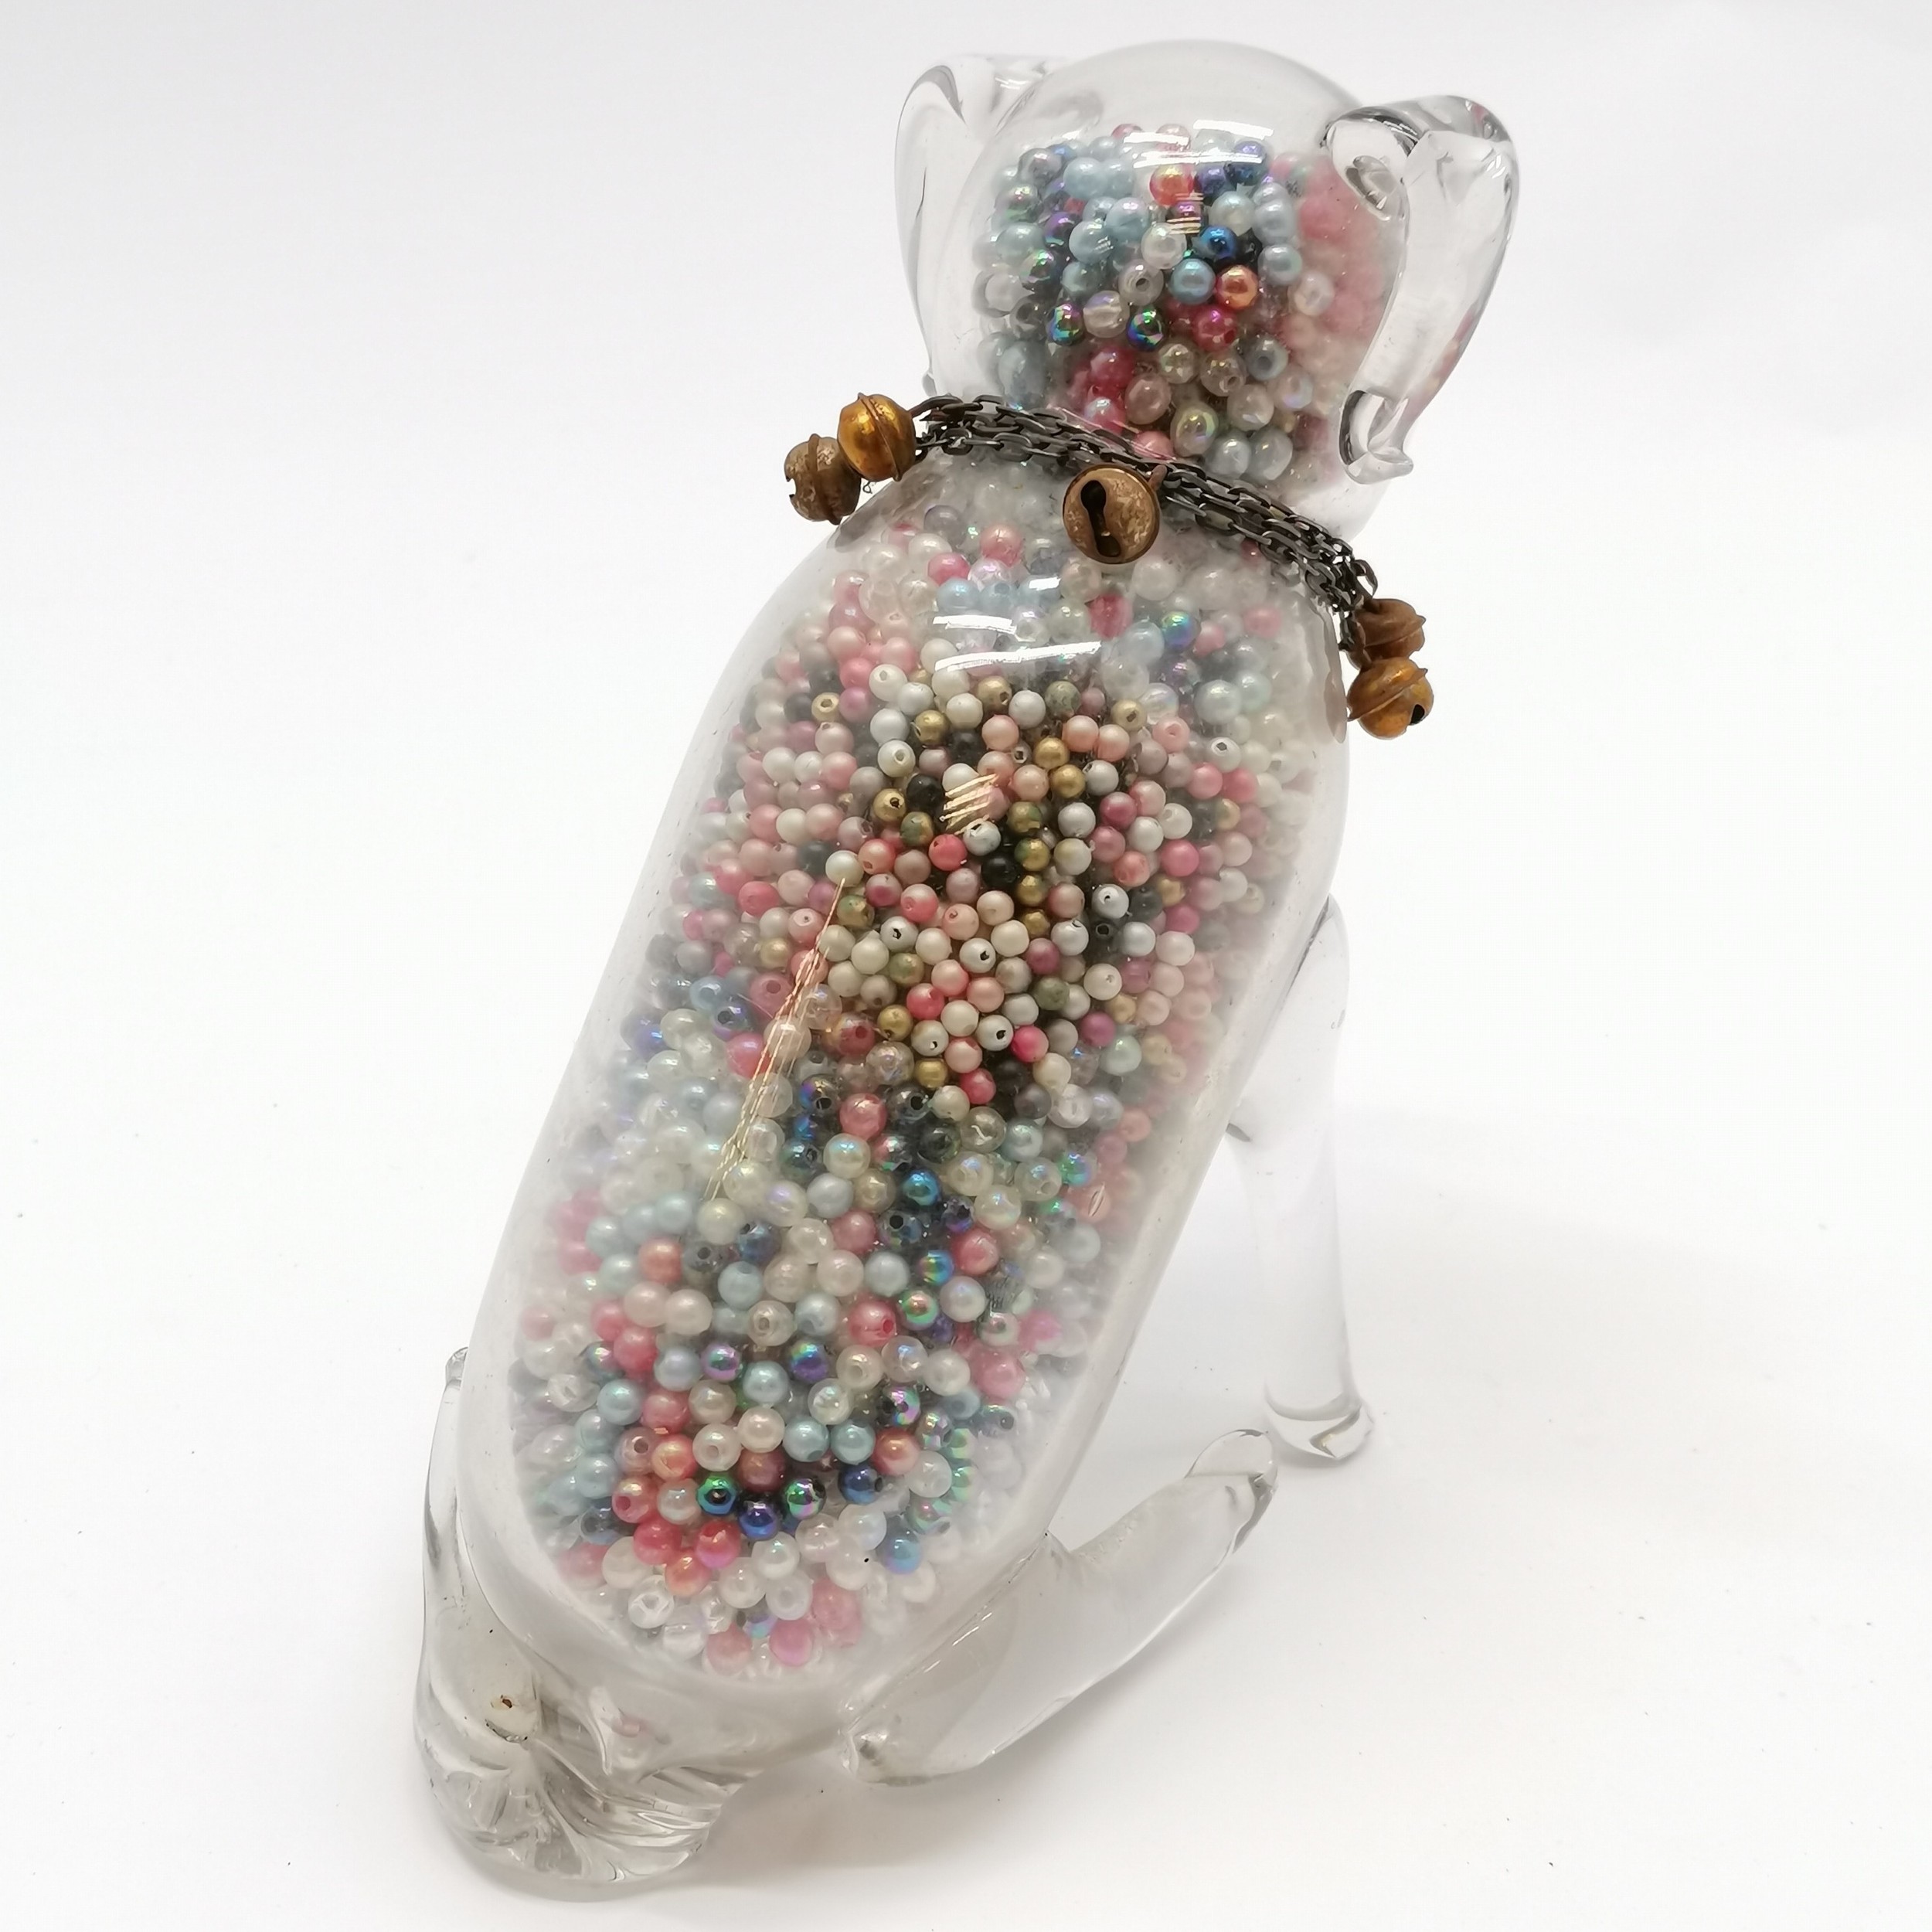 Unusual novelty glass dog figure filled with beads & has a metal chain collar with bells - 18.5cm - Image 3 of 4